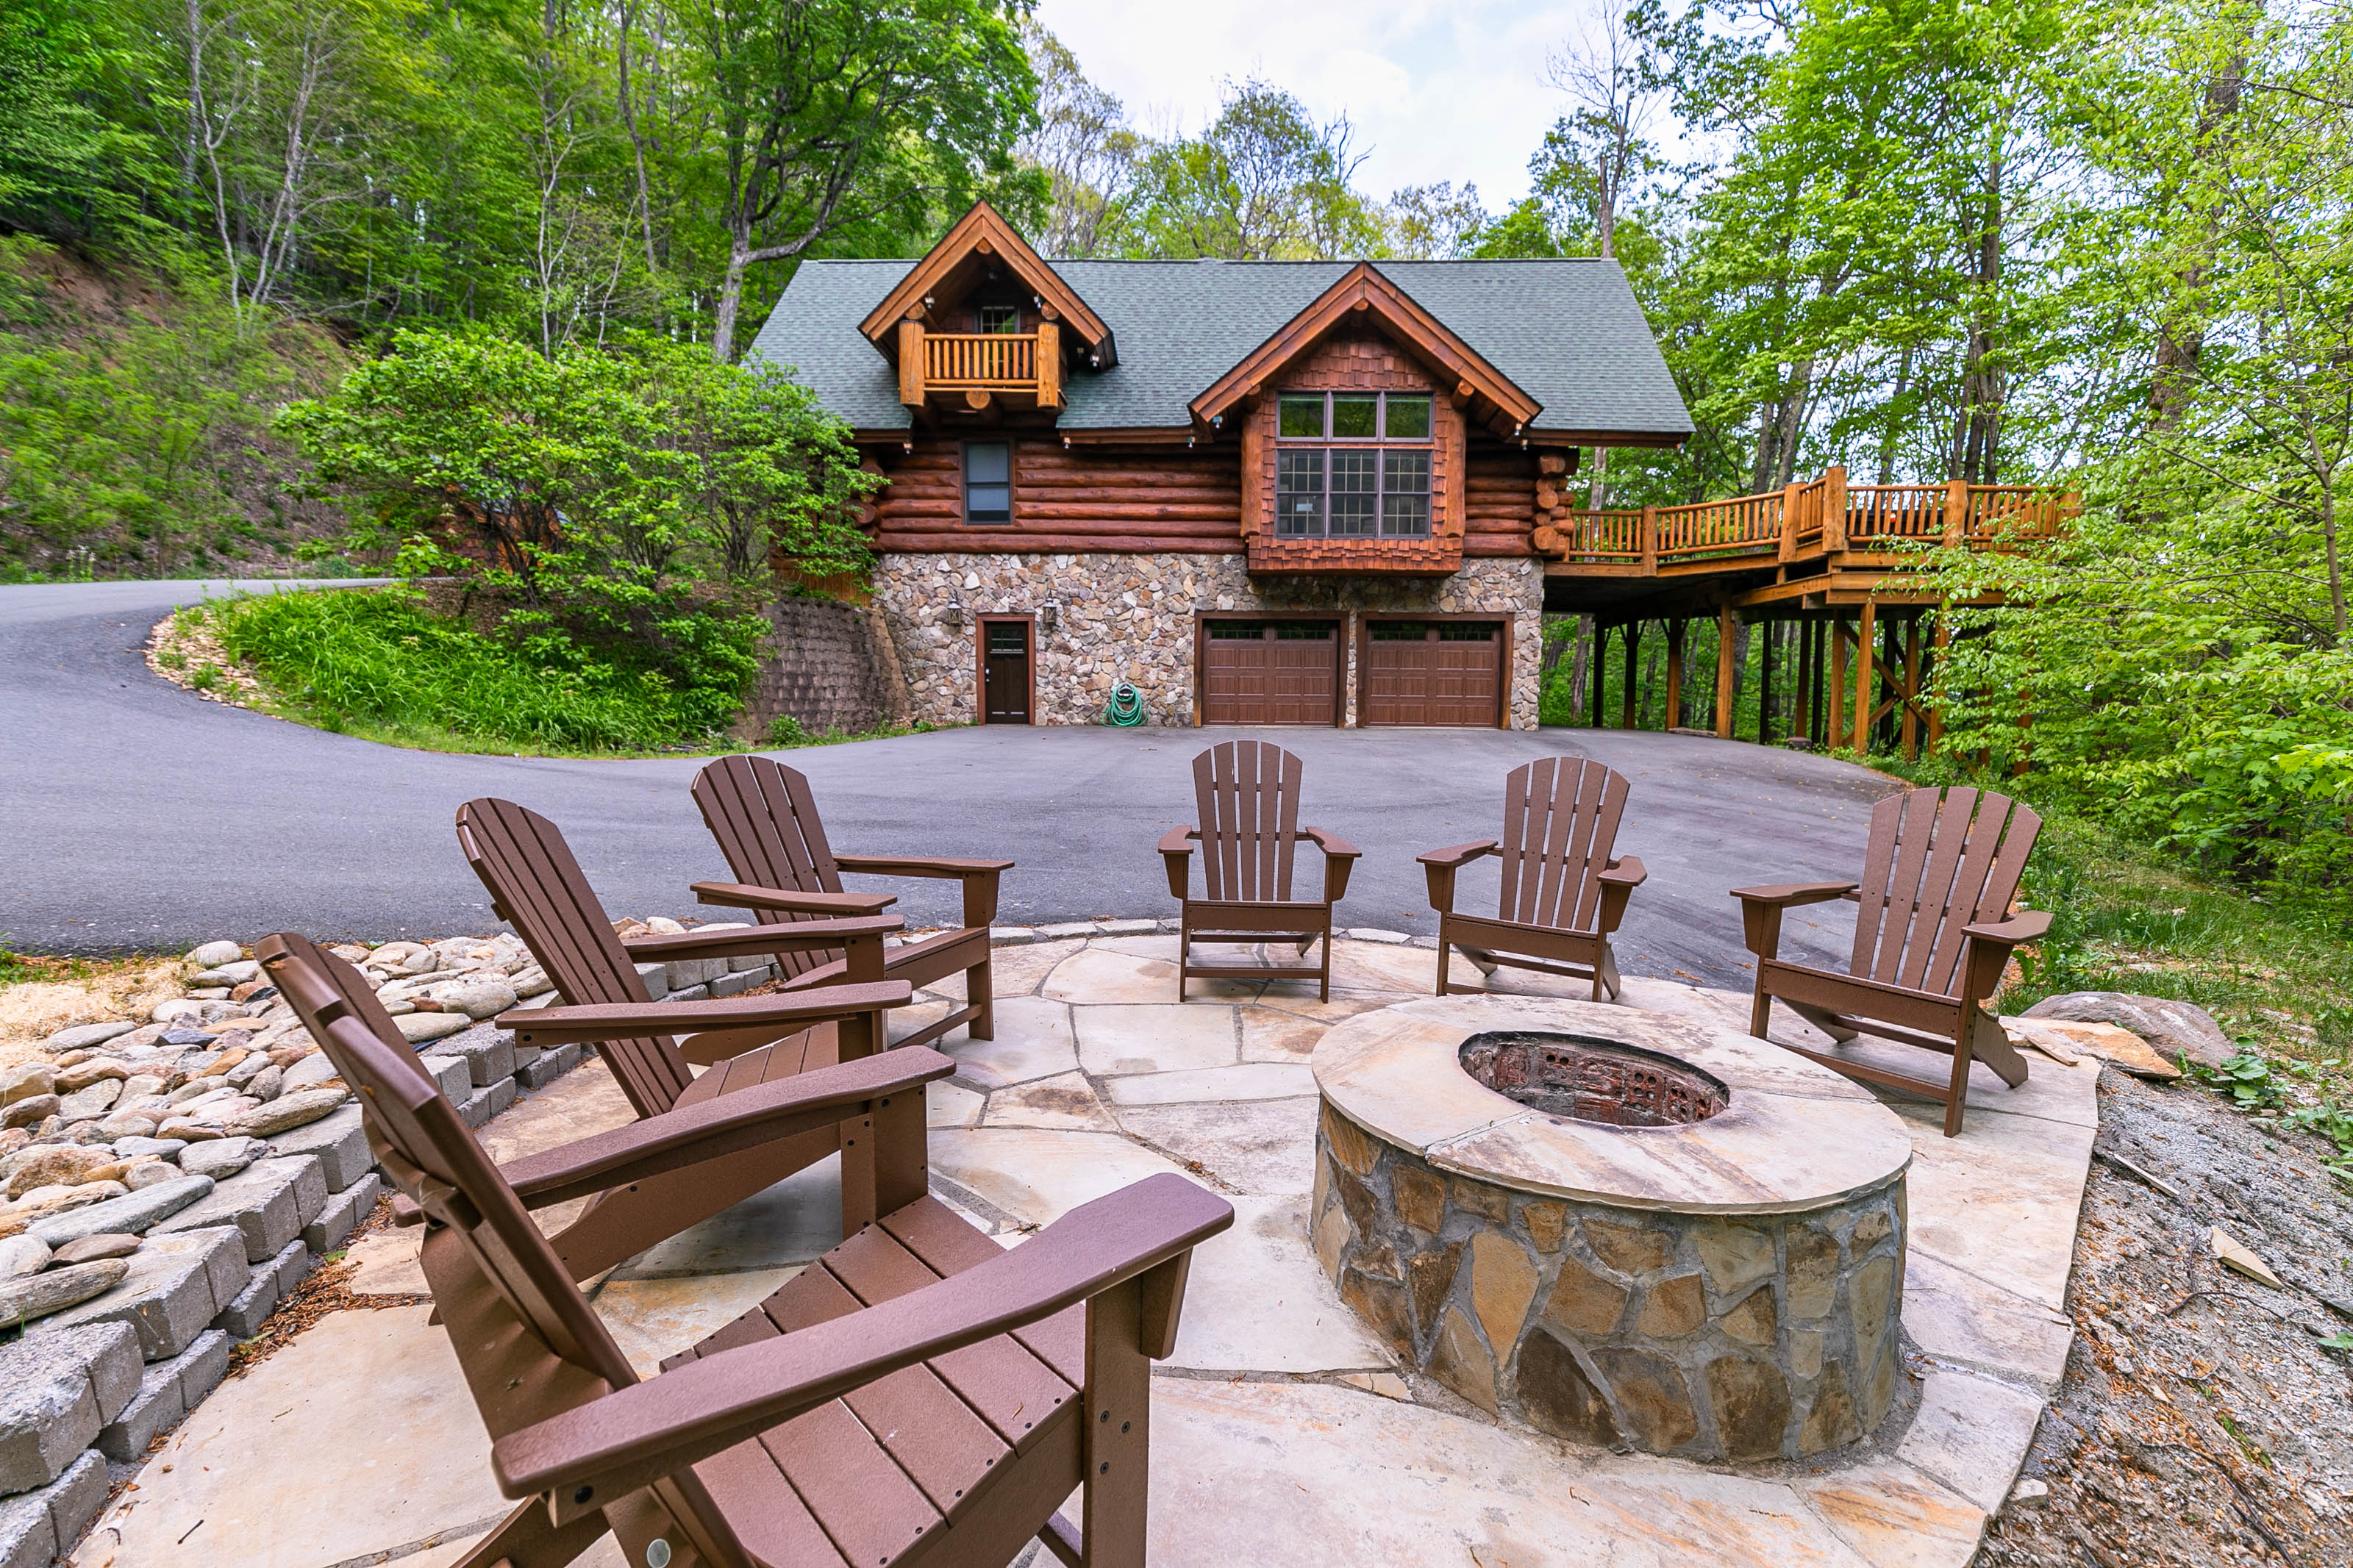 Buffalo Creek Lodge - Private home on 12 acres. Stunning views, hiking trails, hot tub, pool table!